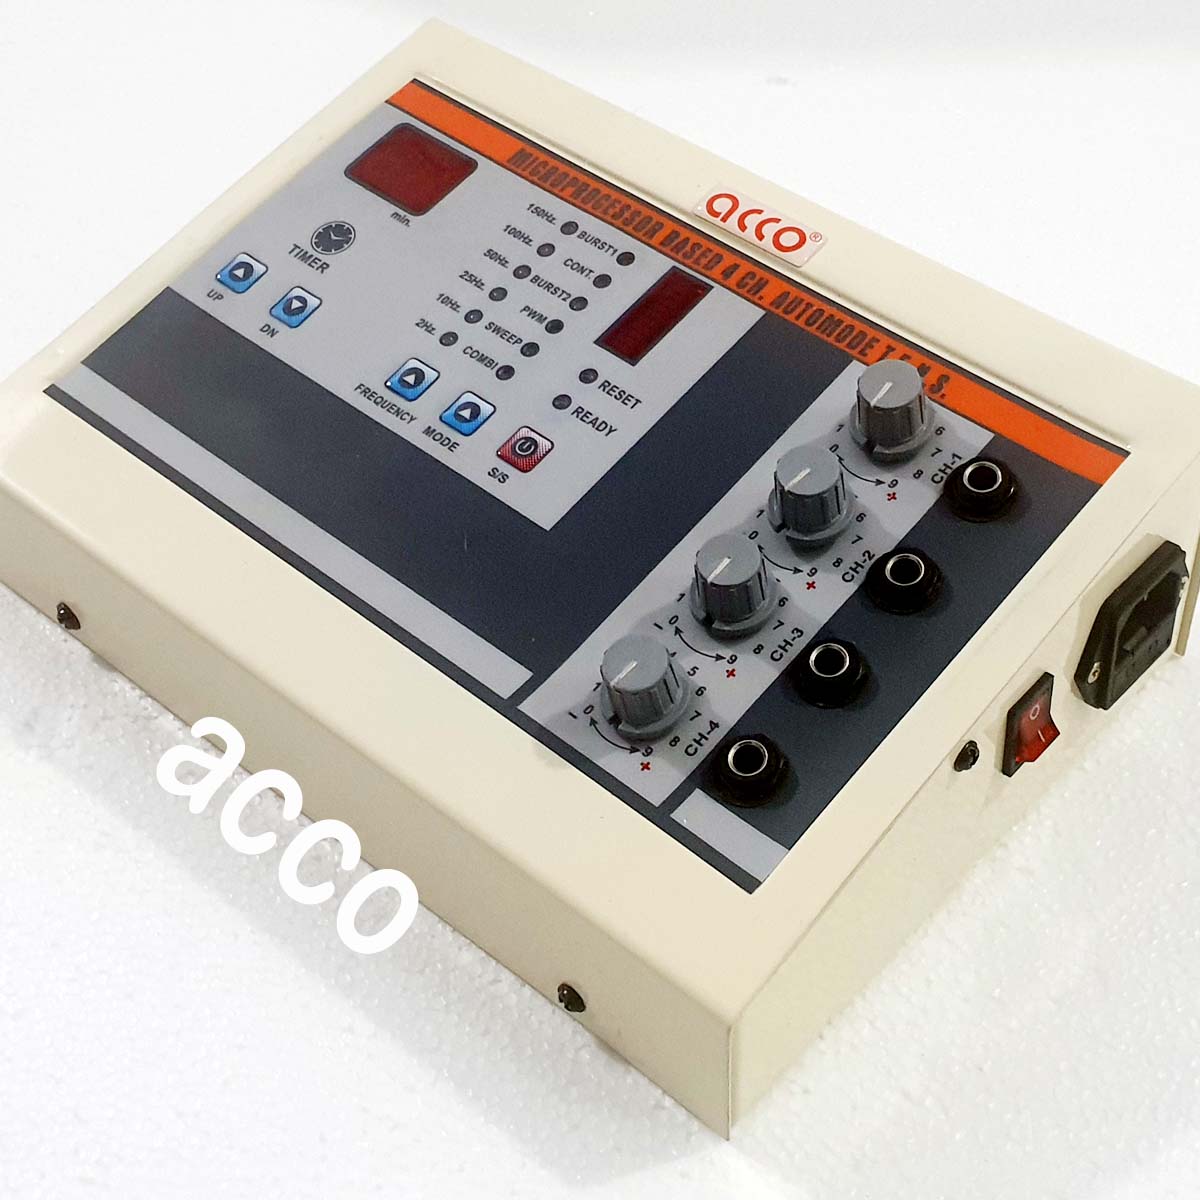 acco 4 Channel Tens Machine Digital with Auto mode